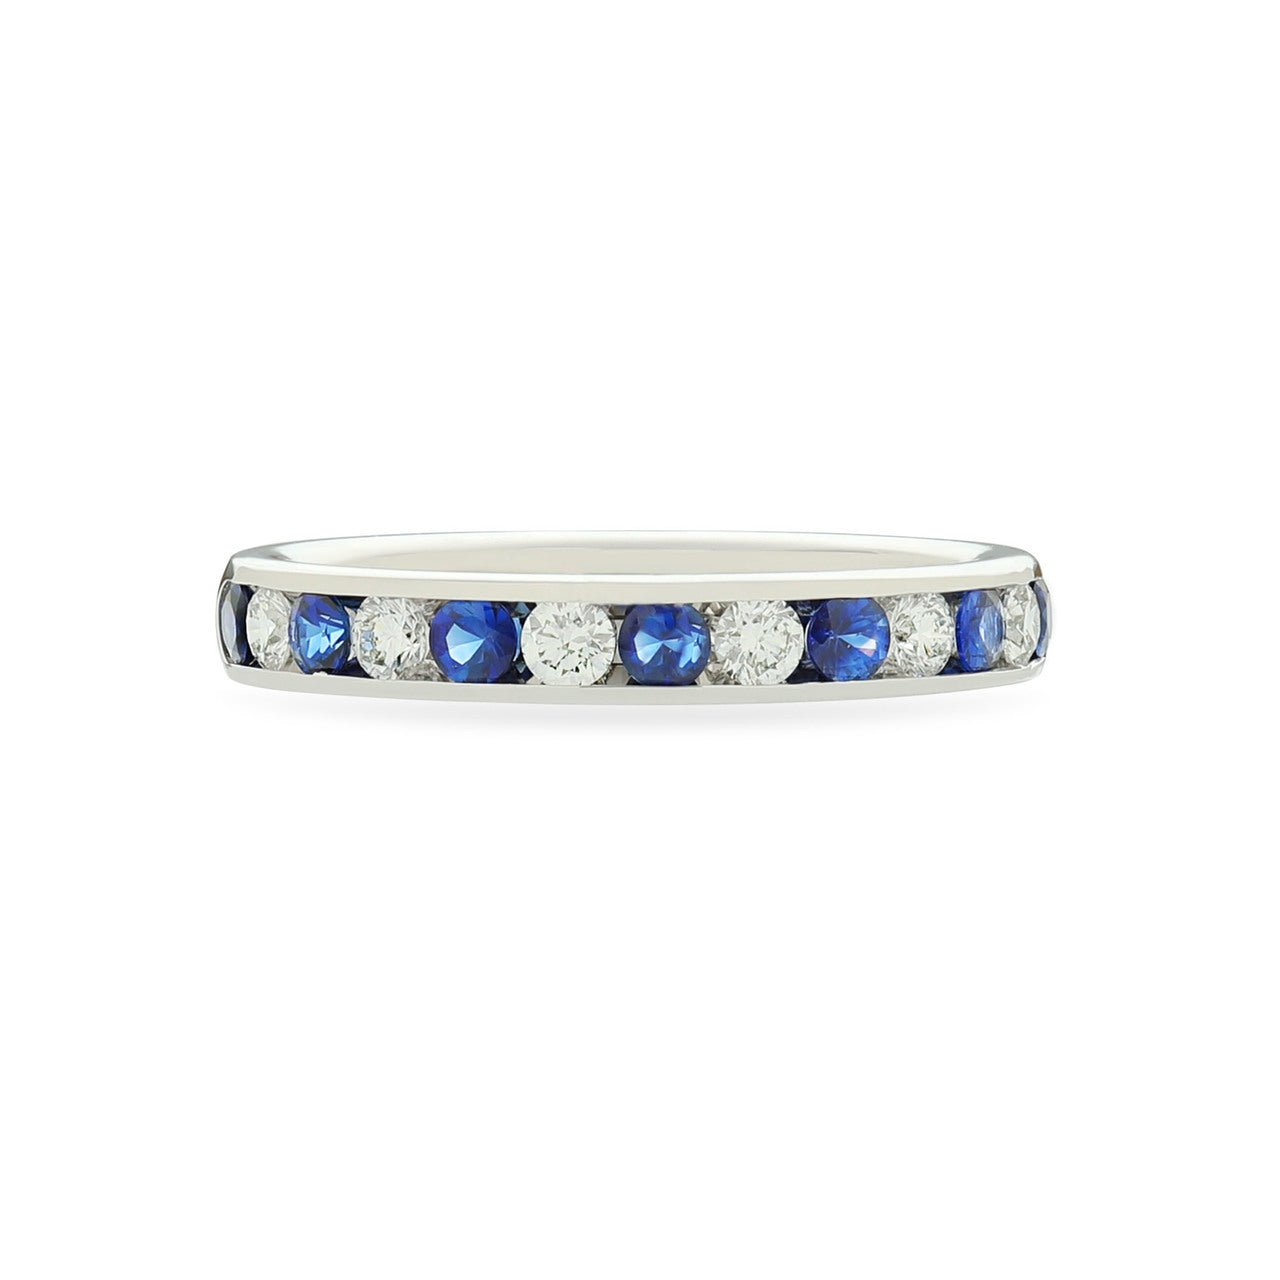 Fink's 18K White Gold Channel Set Diamond and Sapphire Wedding Band